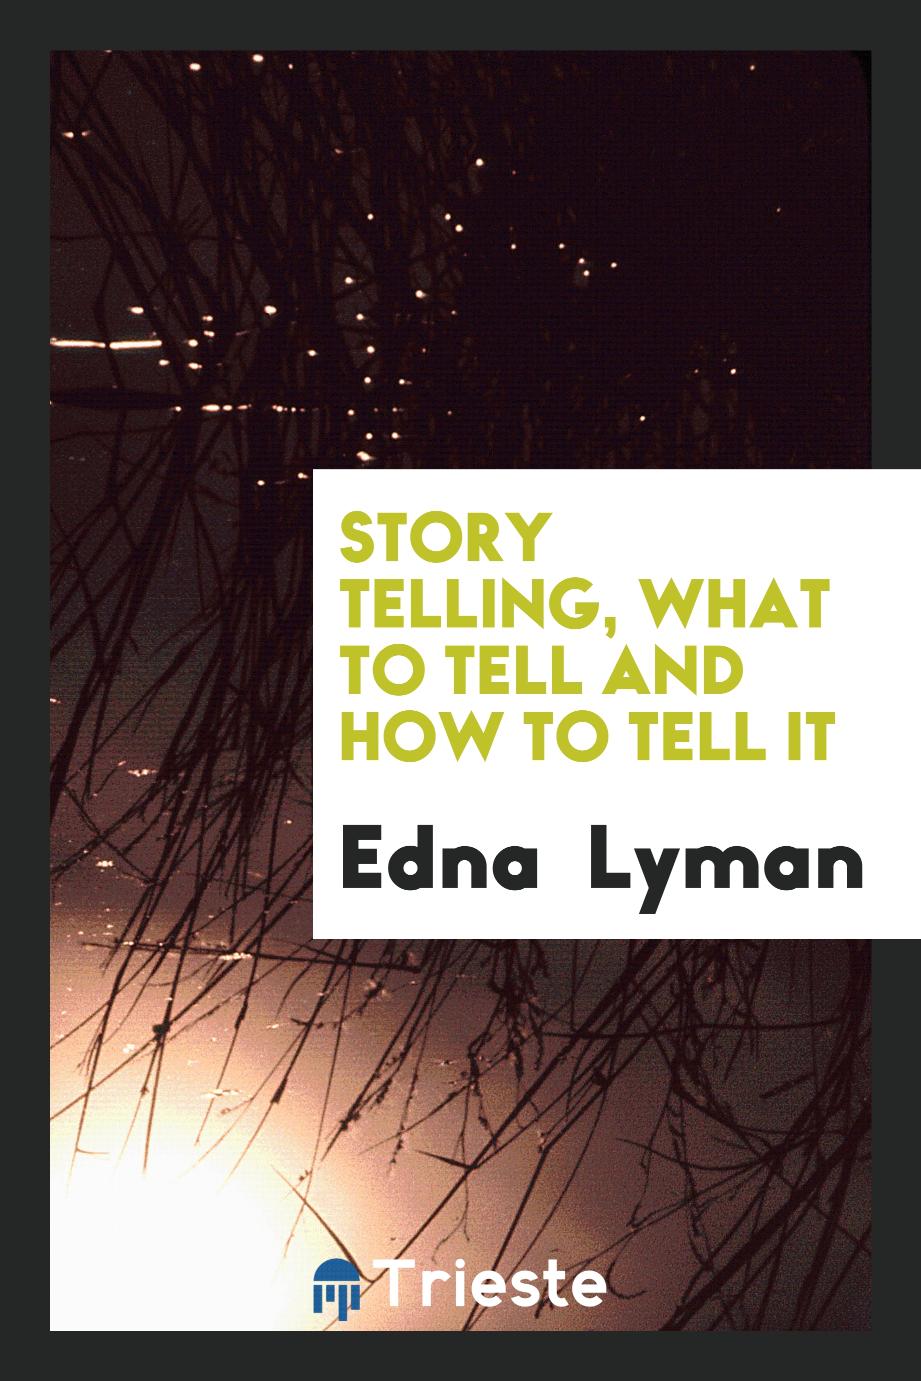 Story telling, what to tell and how to tell it